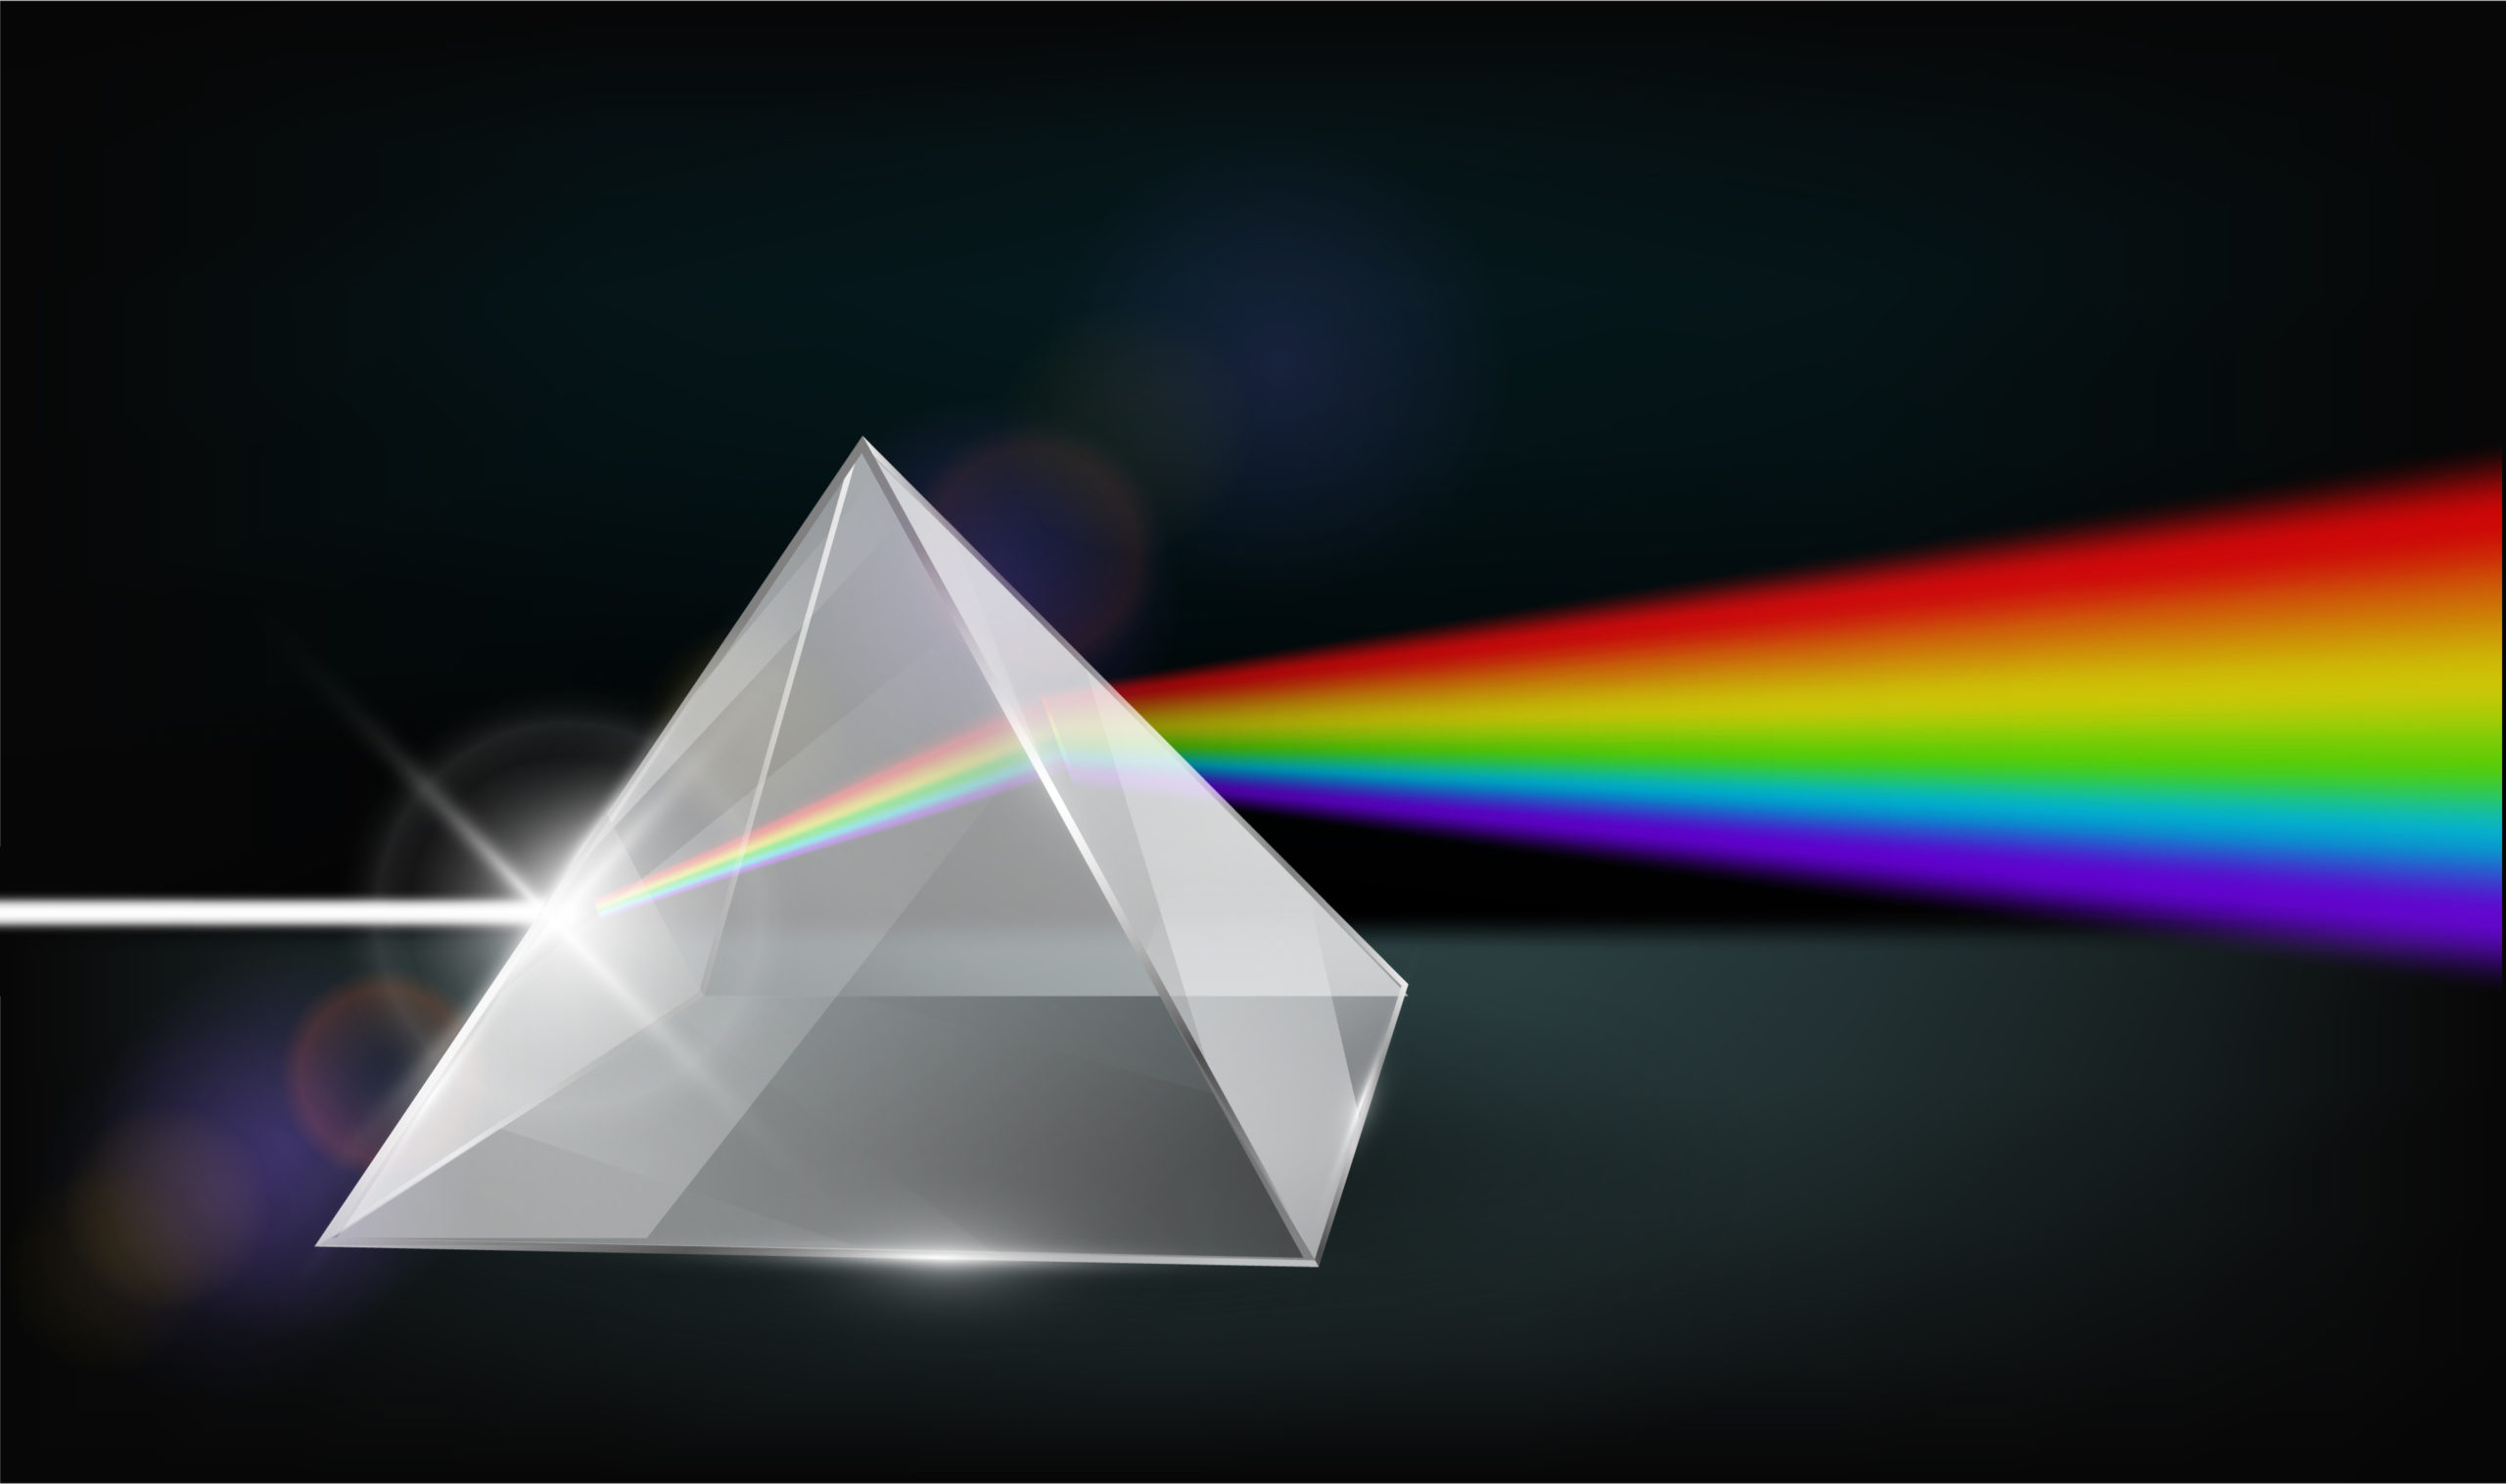 refraction of light in prism